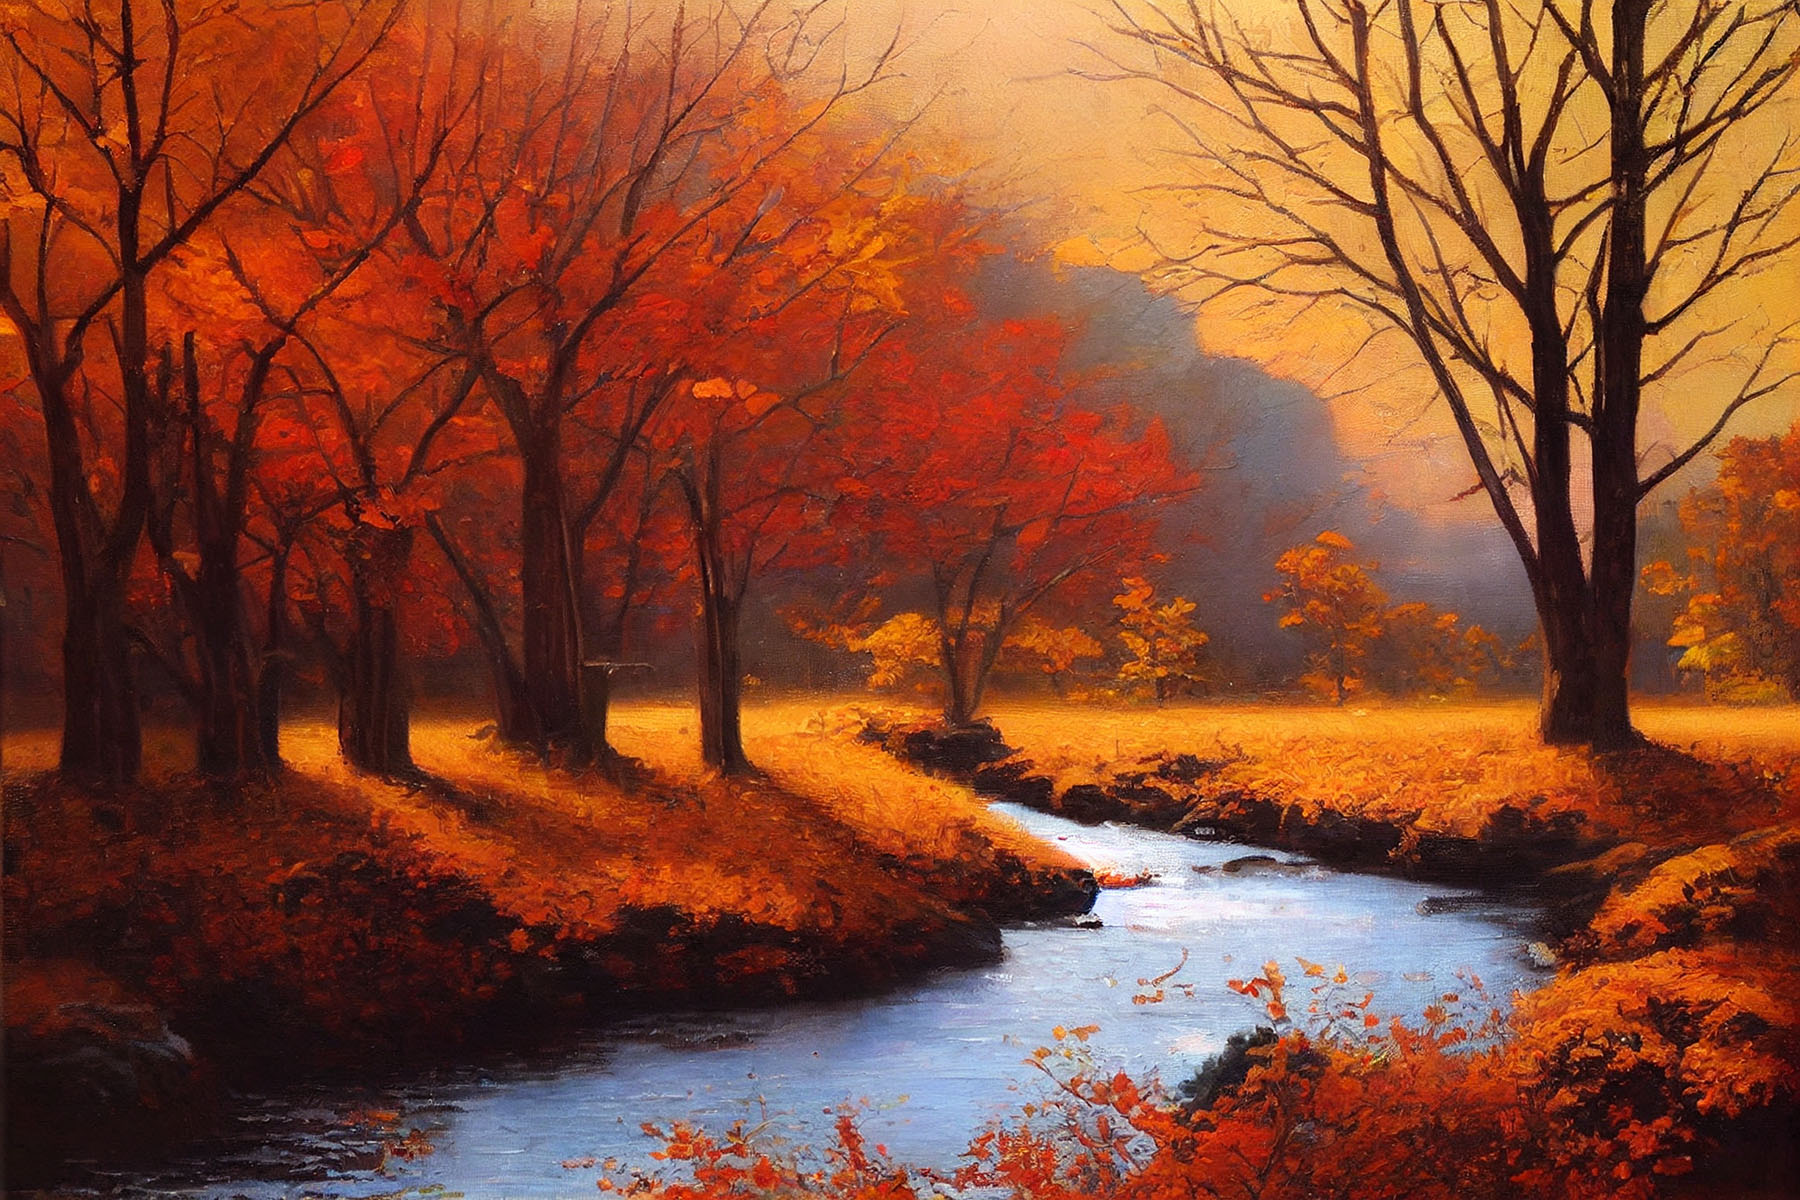 painting a fall landscape scene